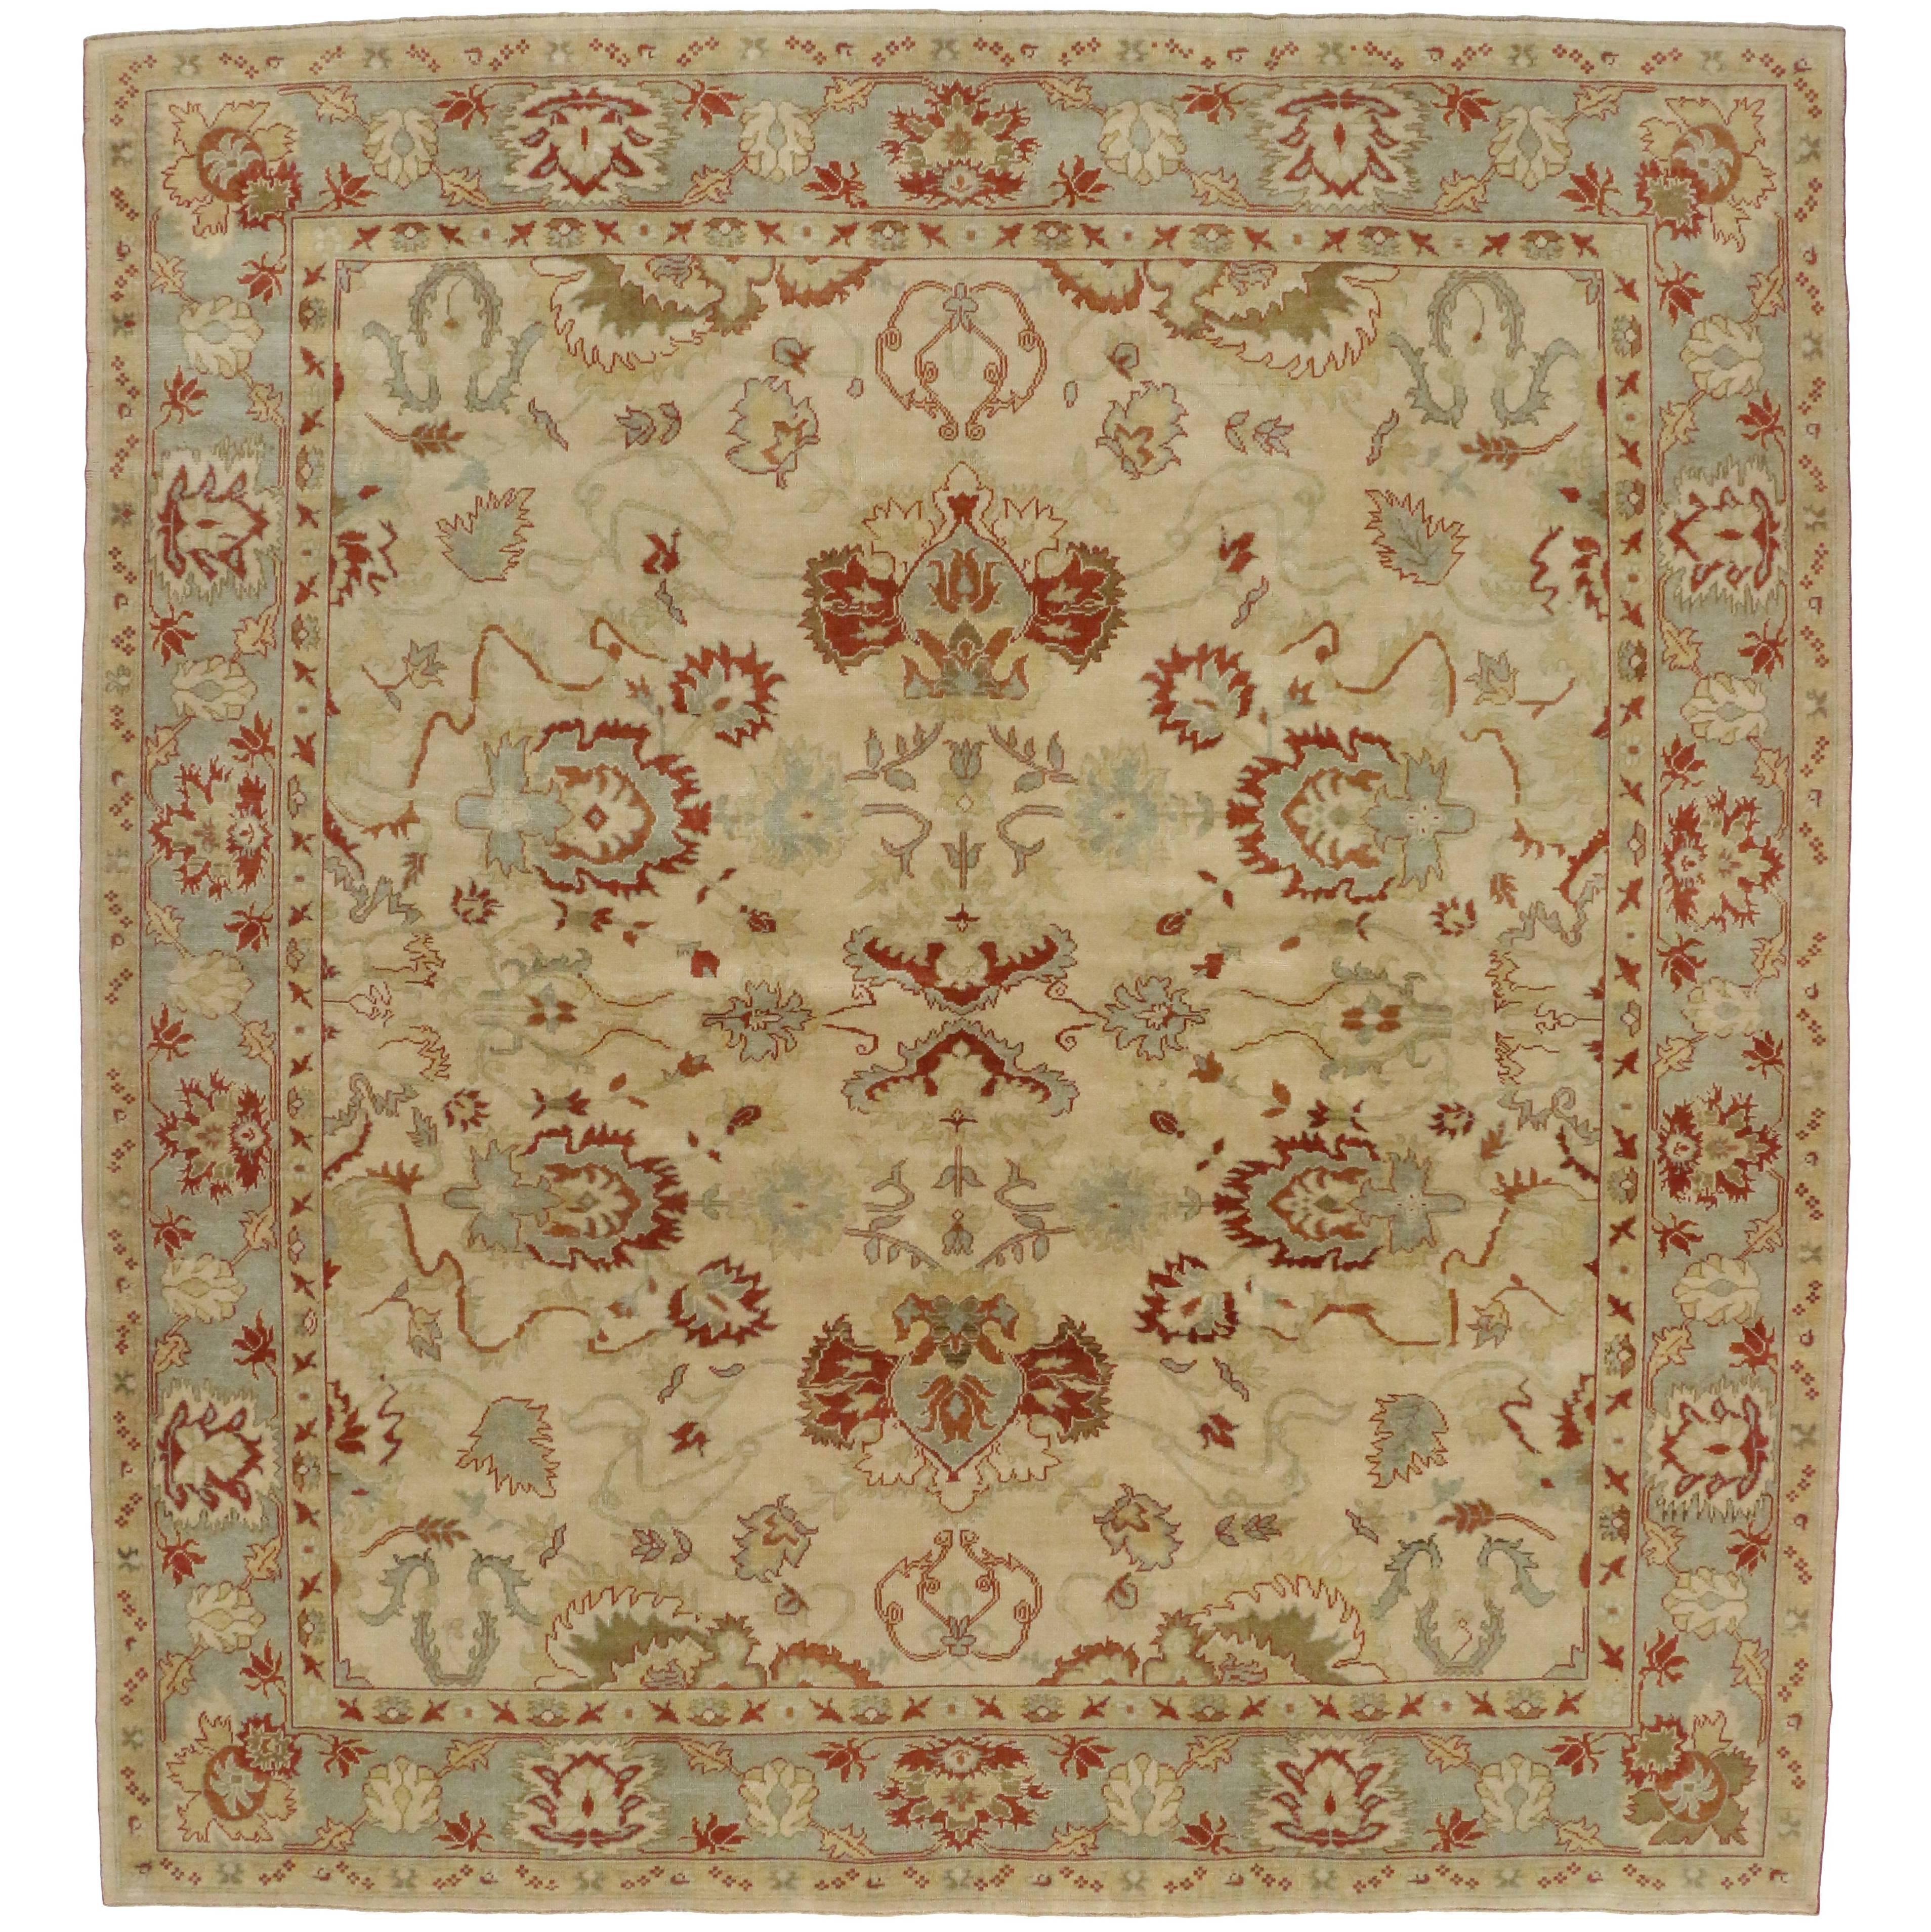 50373, new Contemporary Turkish Oushak rug with Modern Transitional style. Blending elements from the modern world with soft colors, this hand knotted wool contemporary Turkish Oushak rug will boost the coziness factor in nearly any space. It